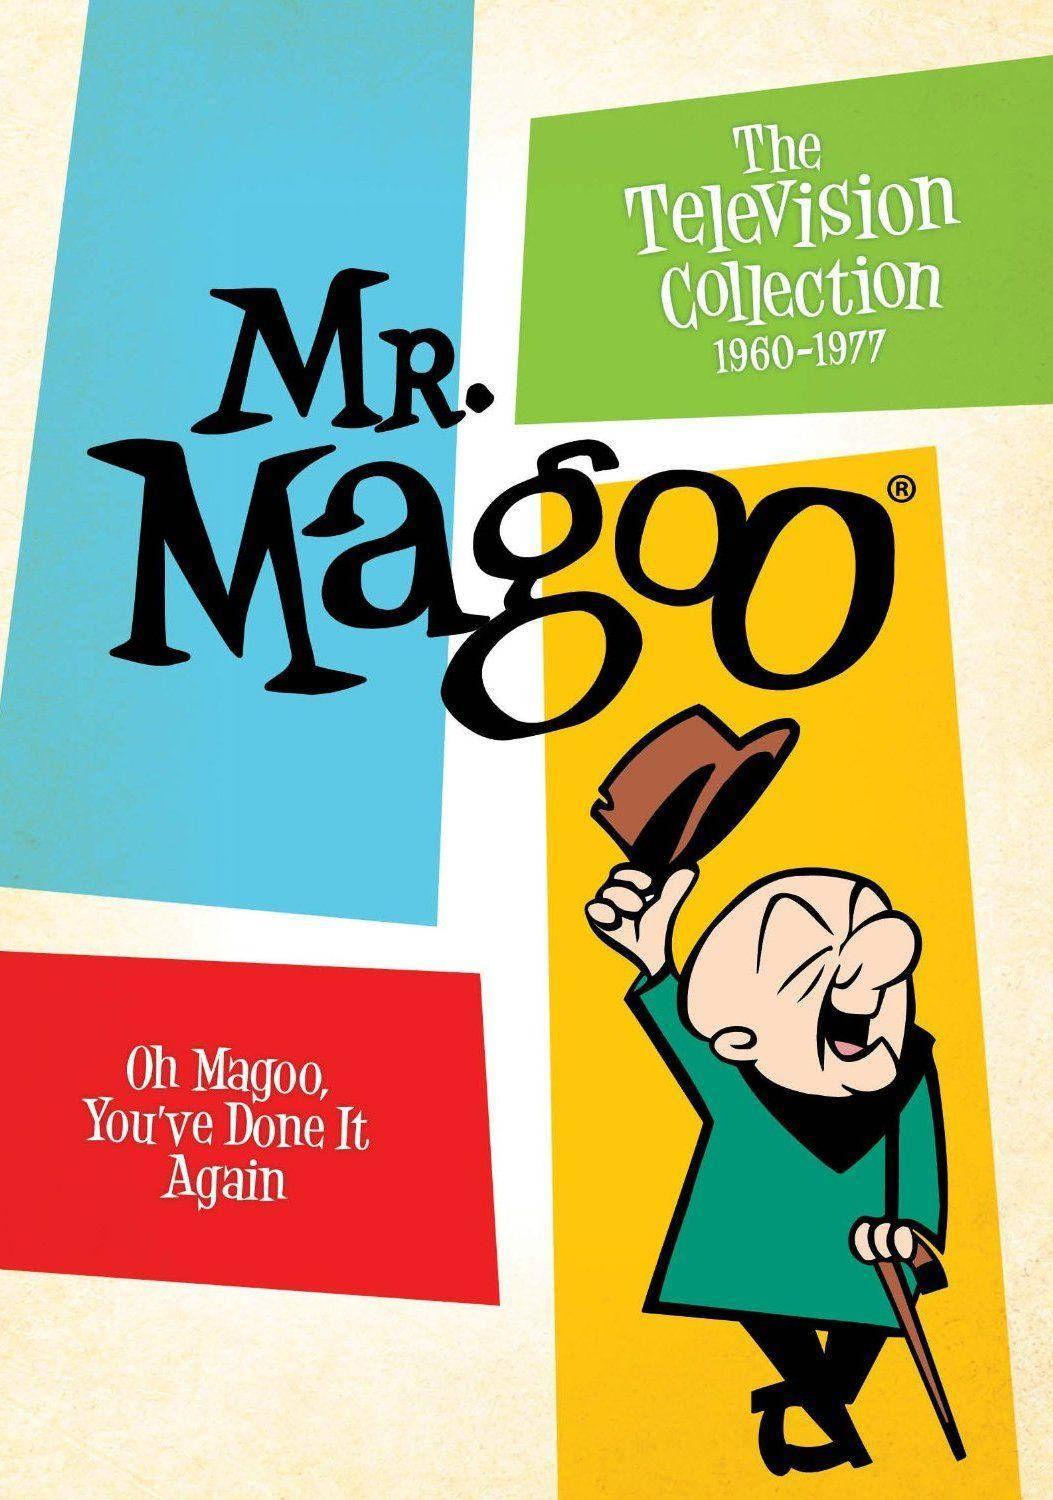 Mr Magoo Television Collection Poster Background